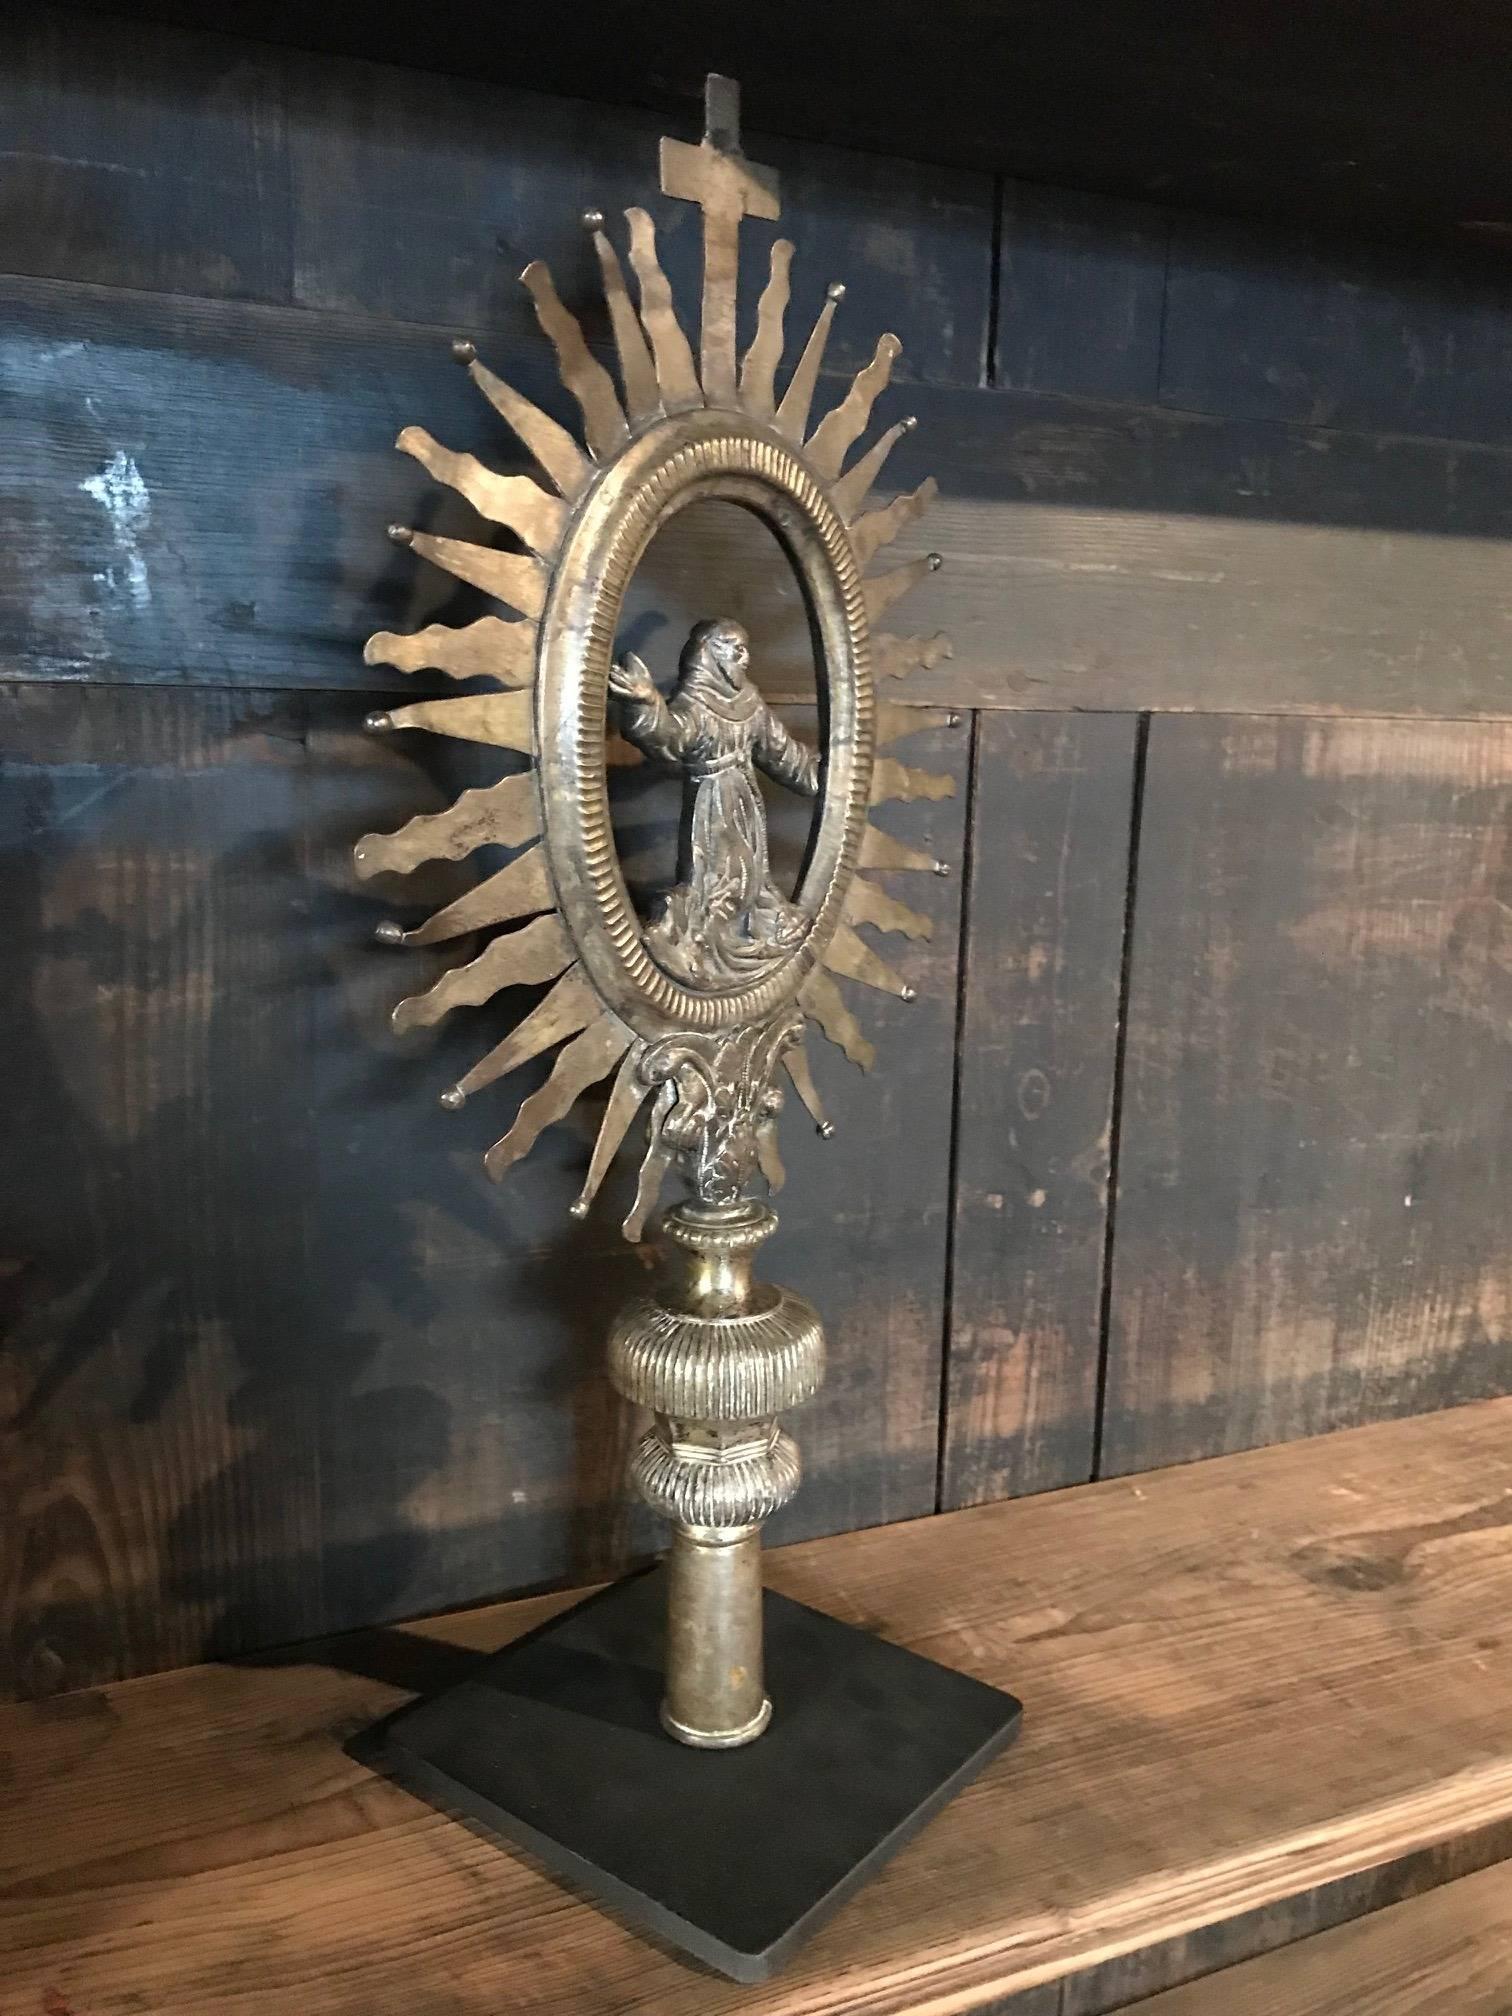 A very beautiful 19th century French metalwork that adorned a Crosier - sceptre or staff. Wonderfully crafted in metal with Saint Francis of Assisi surrounded by a stunning sunburst - now mounted on an iron base.